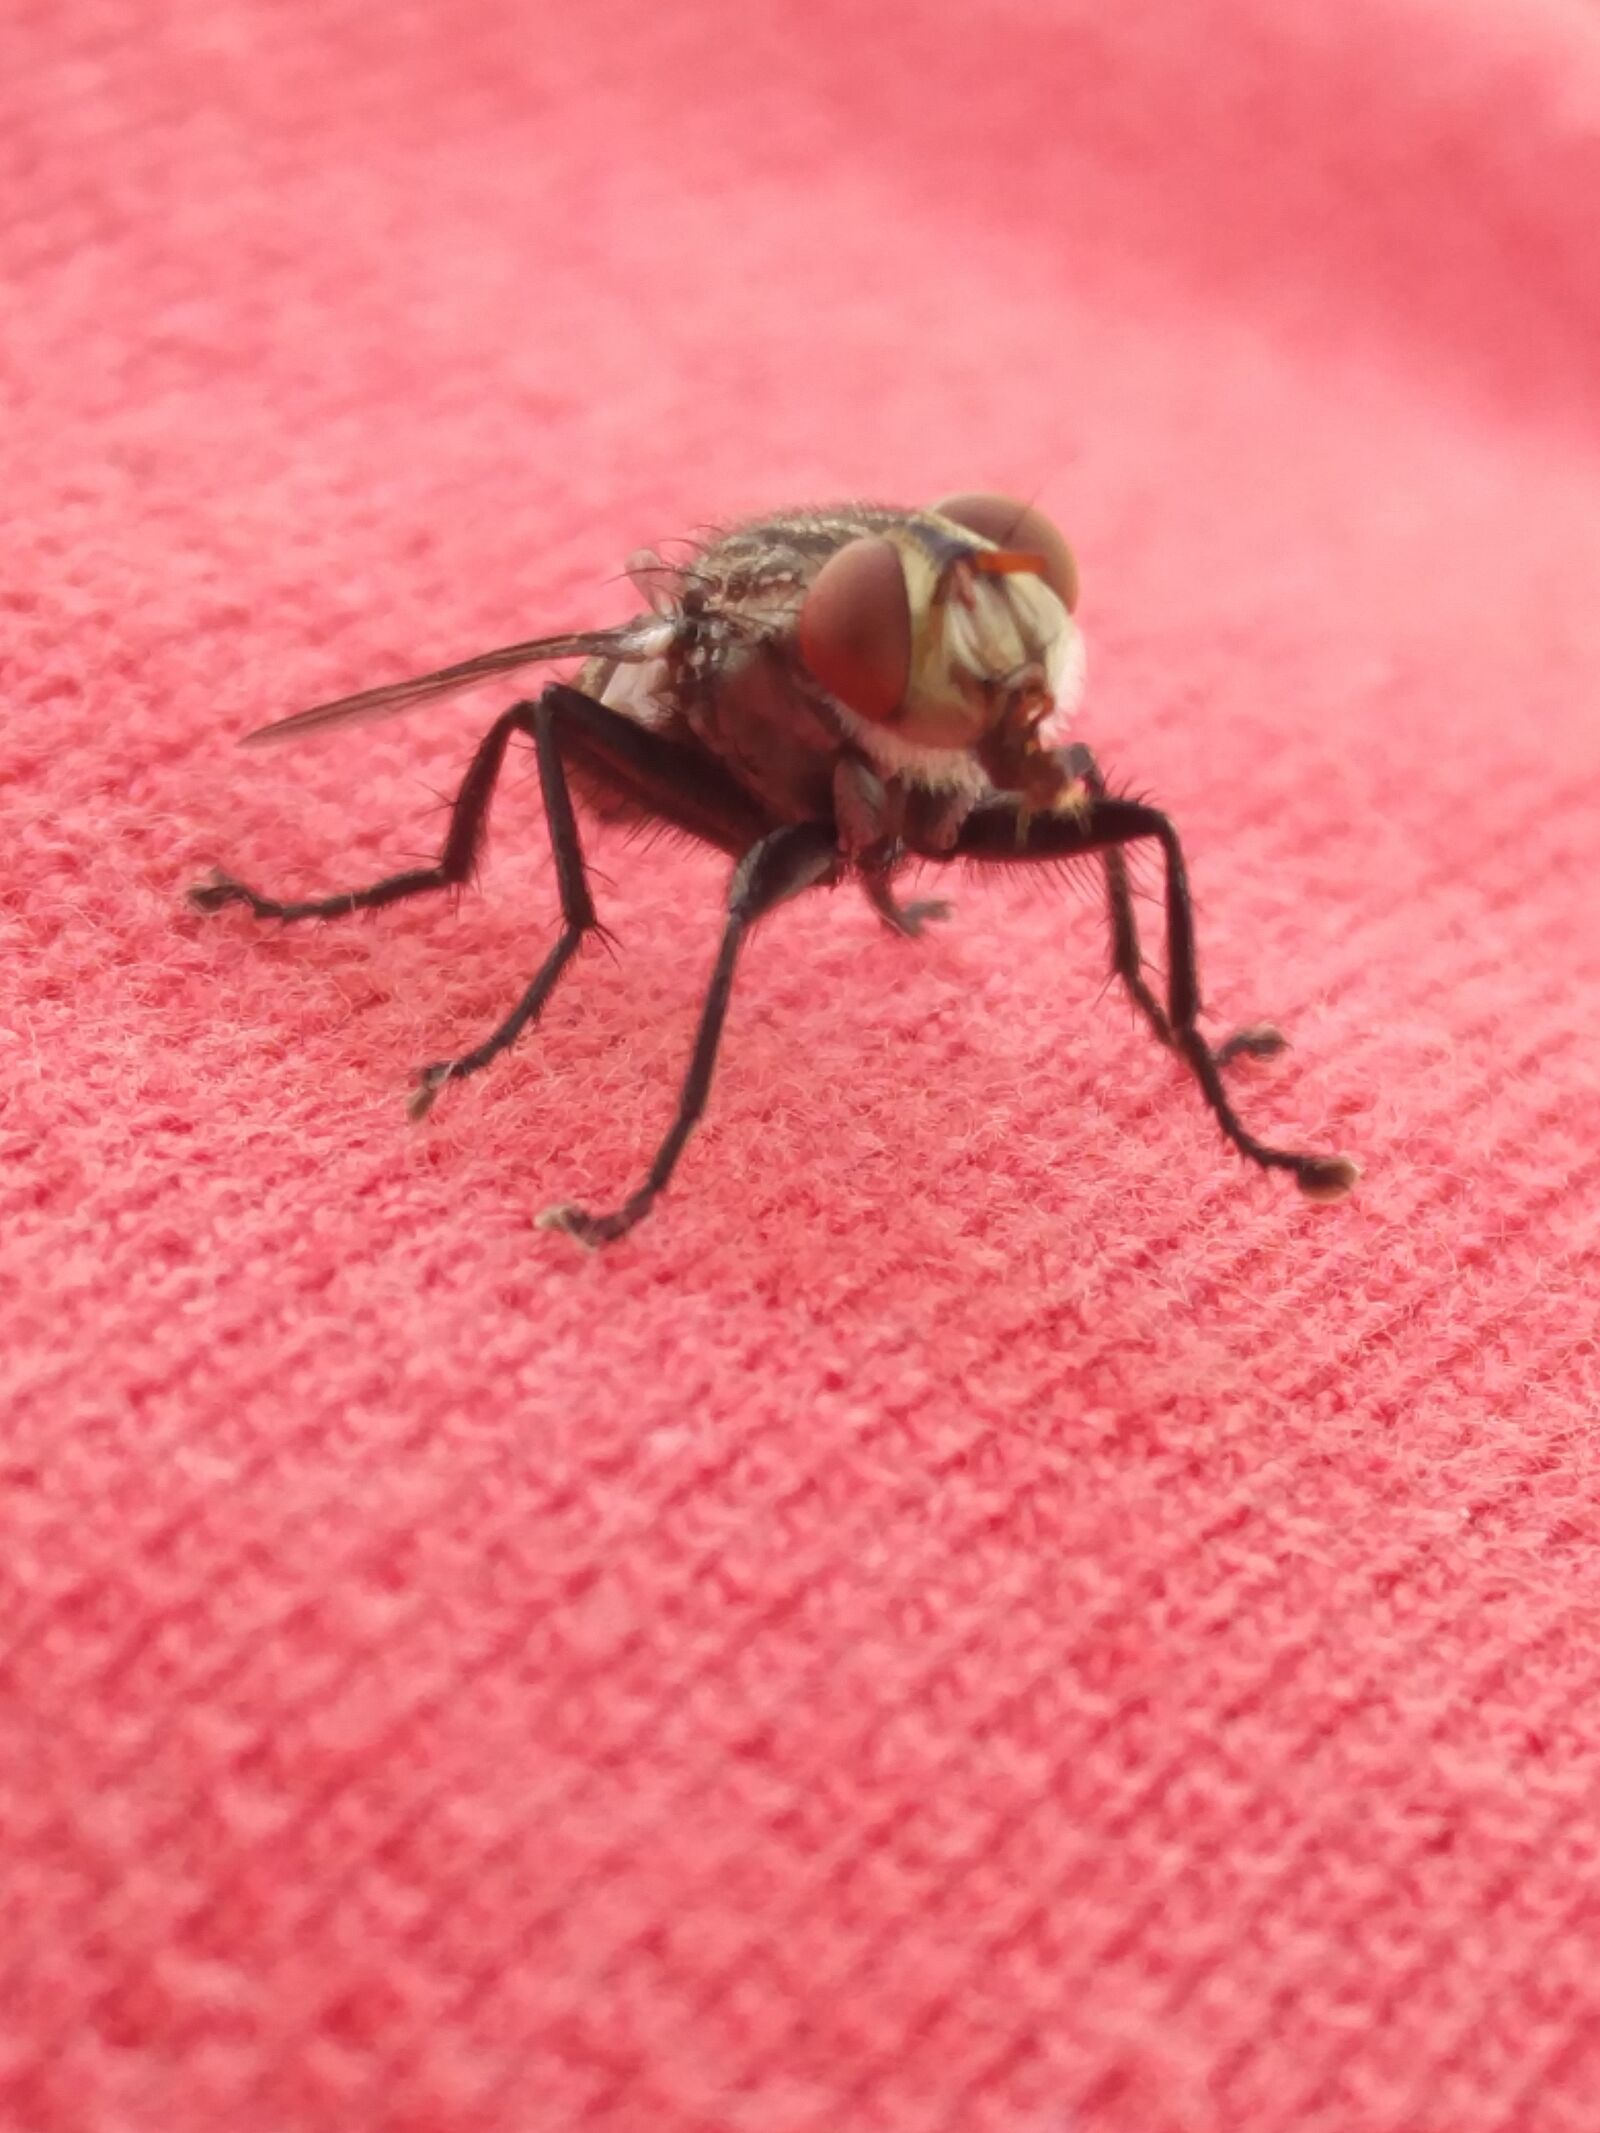 OnePlus 2 sample photo. Insect, nature, animal photography